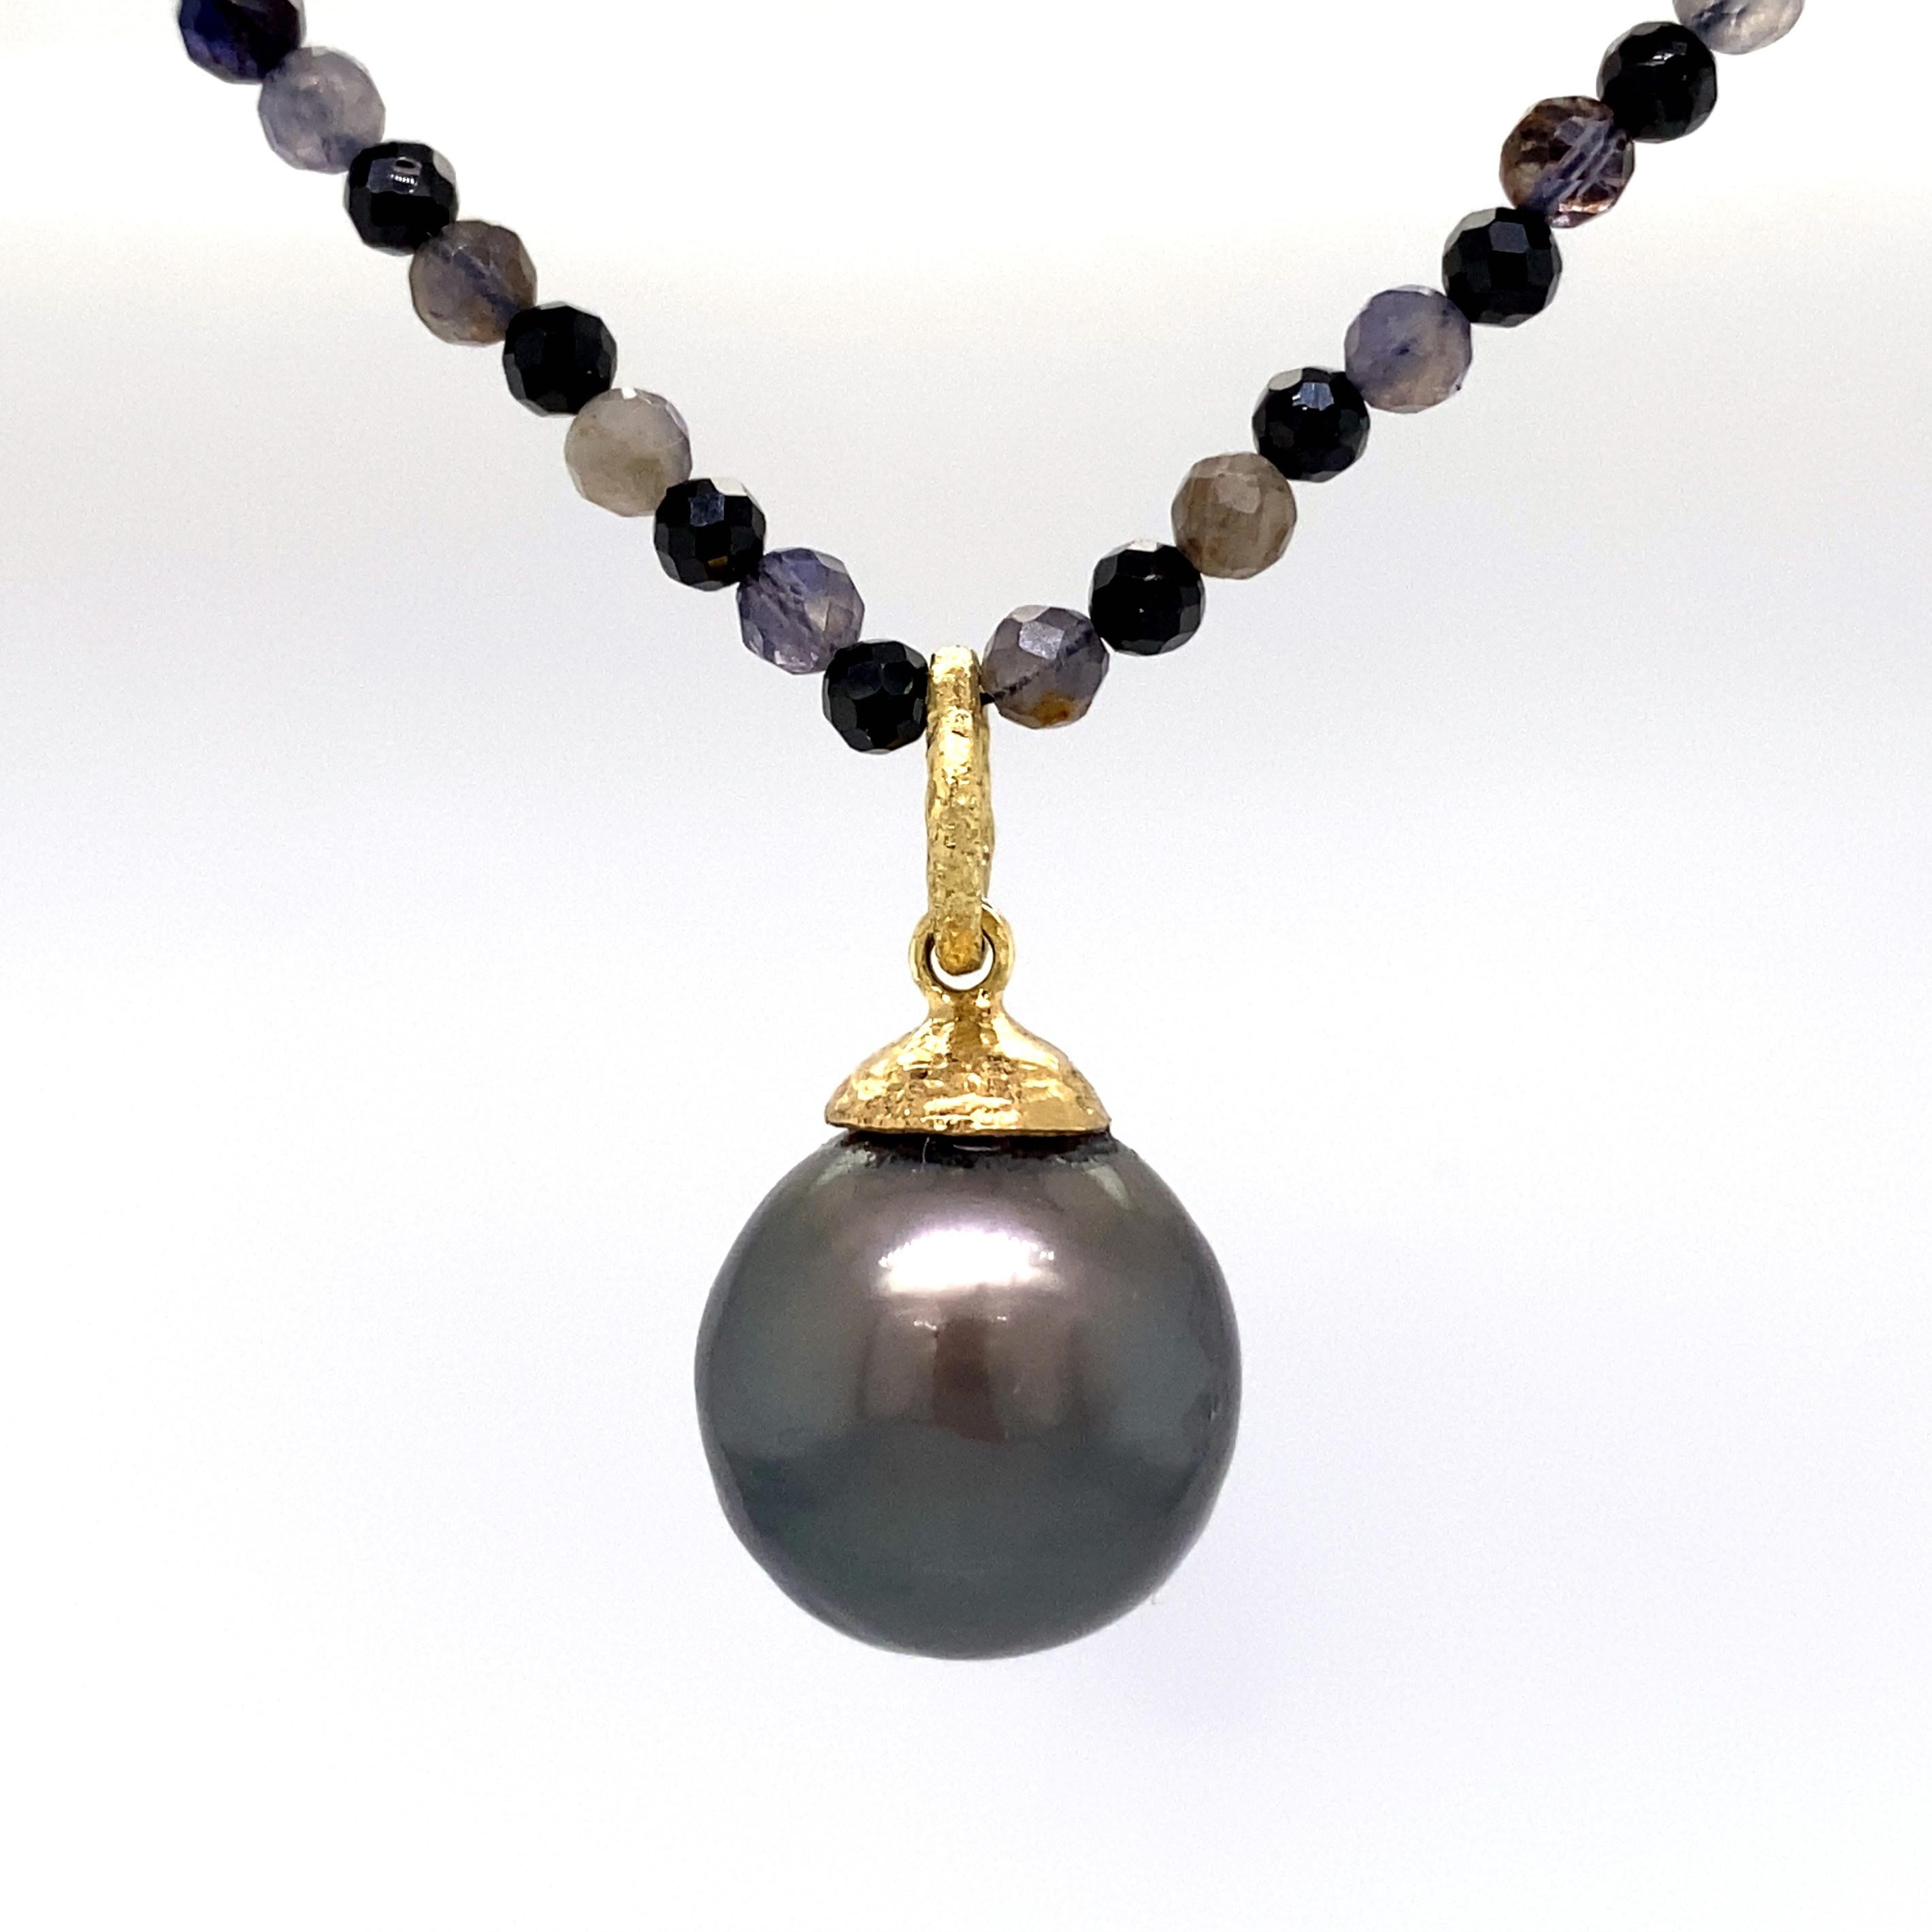 This large, beautiful and lustrous baroque Tahitian black pearl can be worn so that the smoothest expanse of its surface faces outward.  Nice!

OR, you can show off the other side, featuring an endearingly expressive collection of bumps and lumps. 